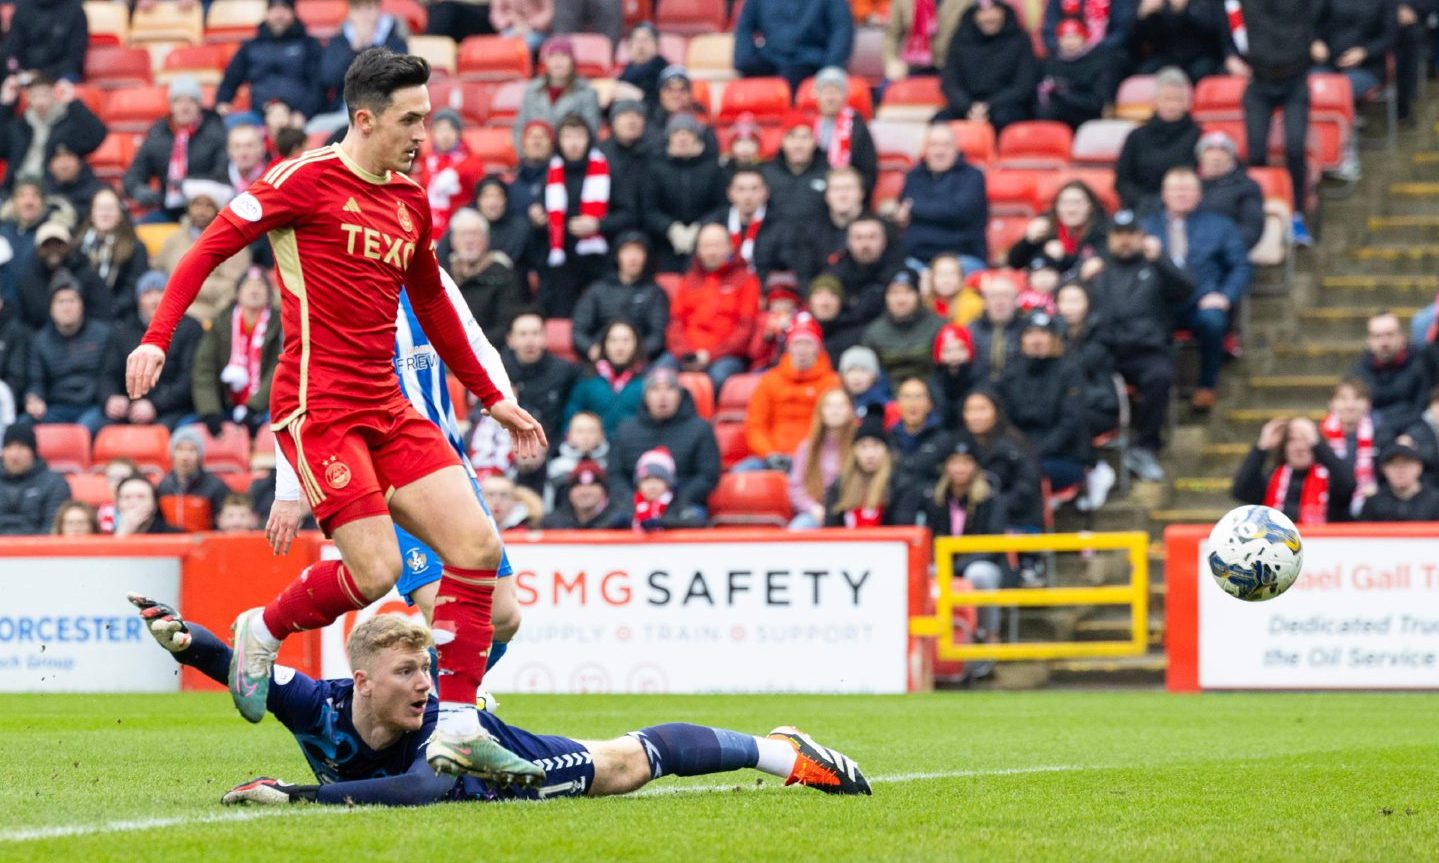 Aberdeen's Jamie McGrath scores to make it 1-0 against Kilmarnock in the Scottish Cup quarter-final at Pittodrie. Image: SNS